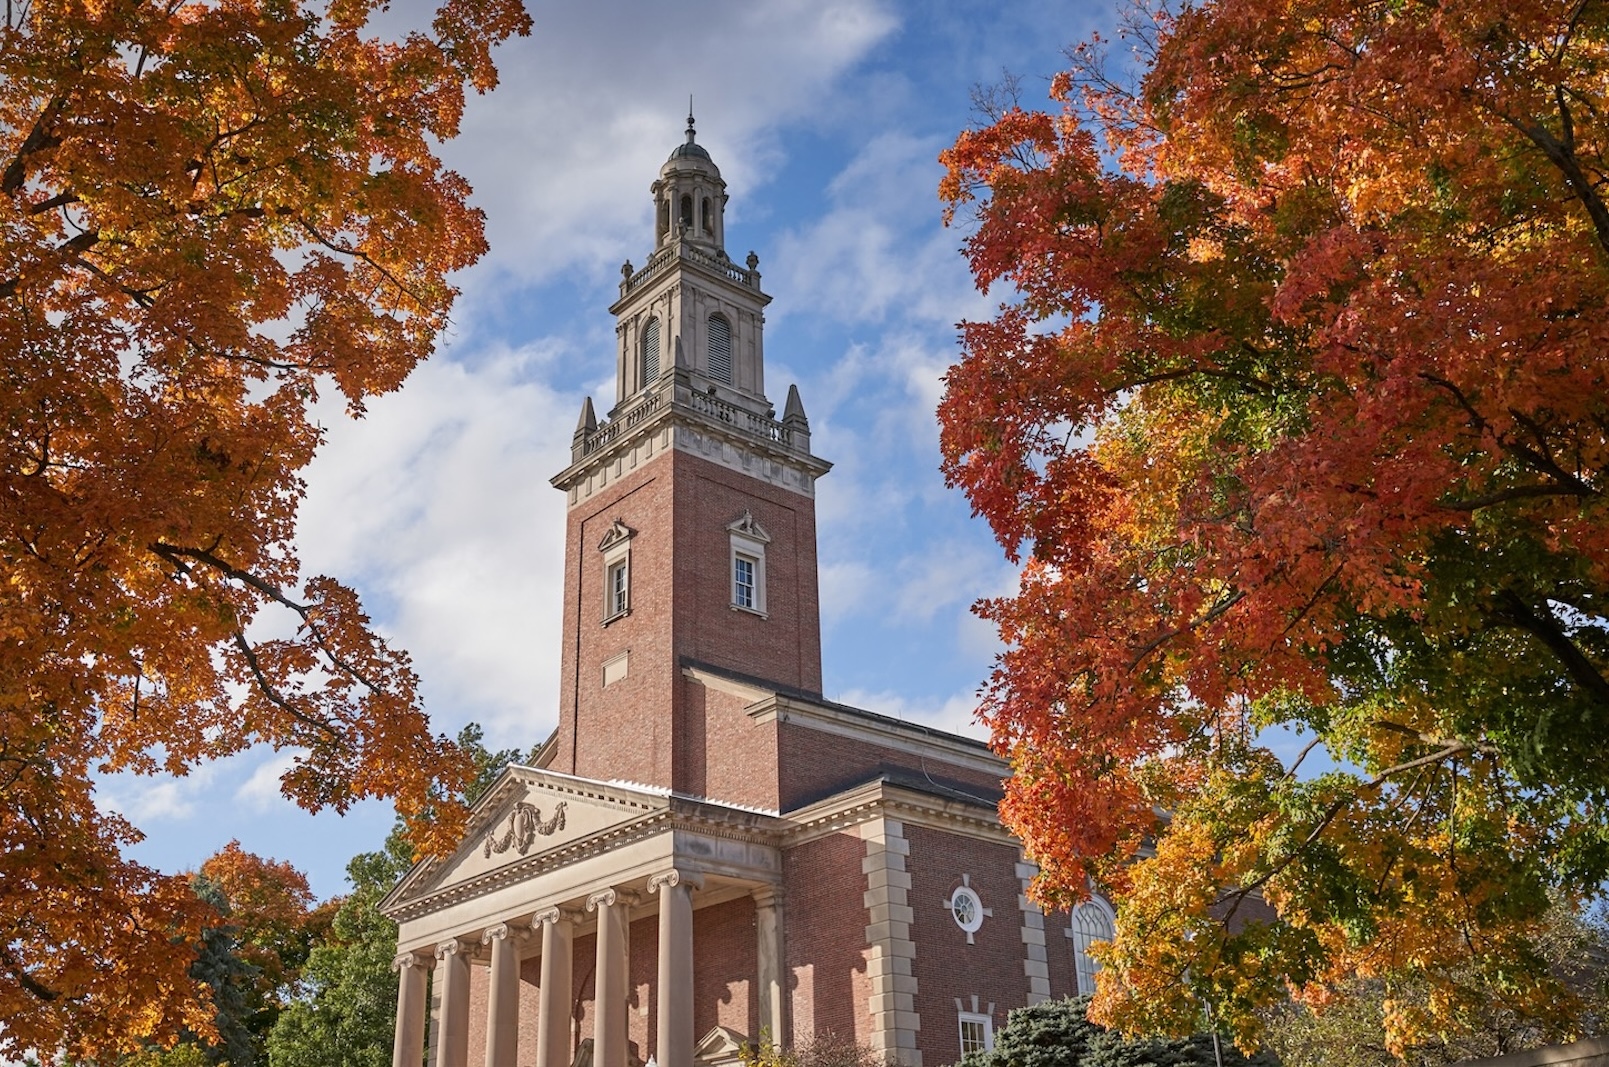 The iconic view of Swasey Chapel in autumn